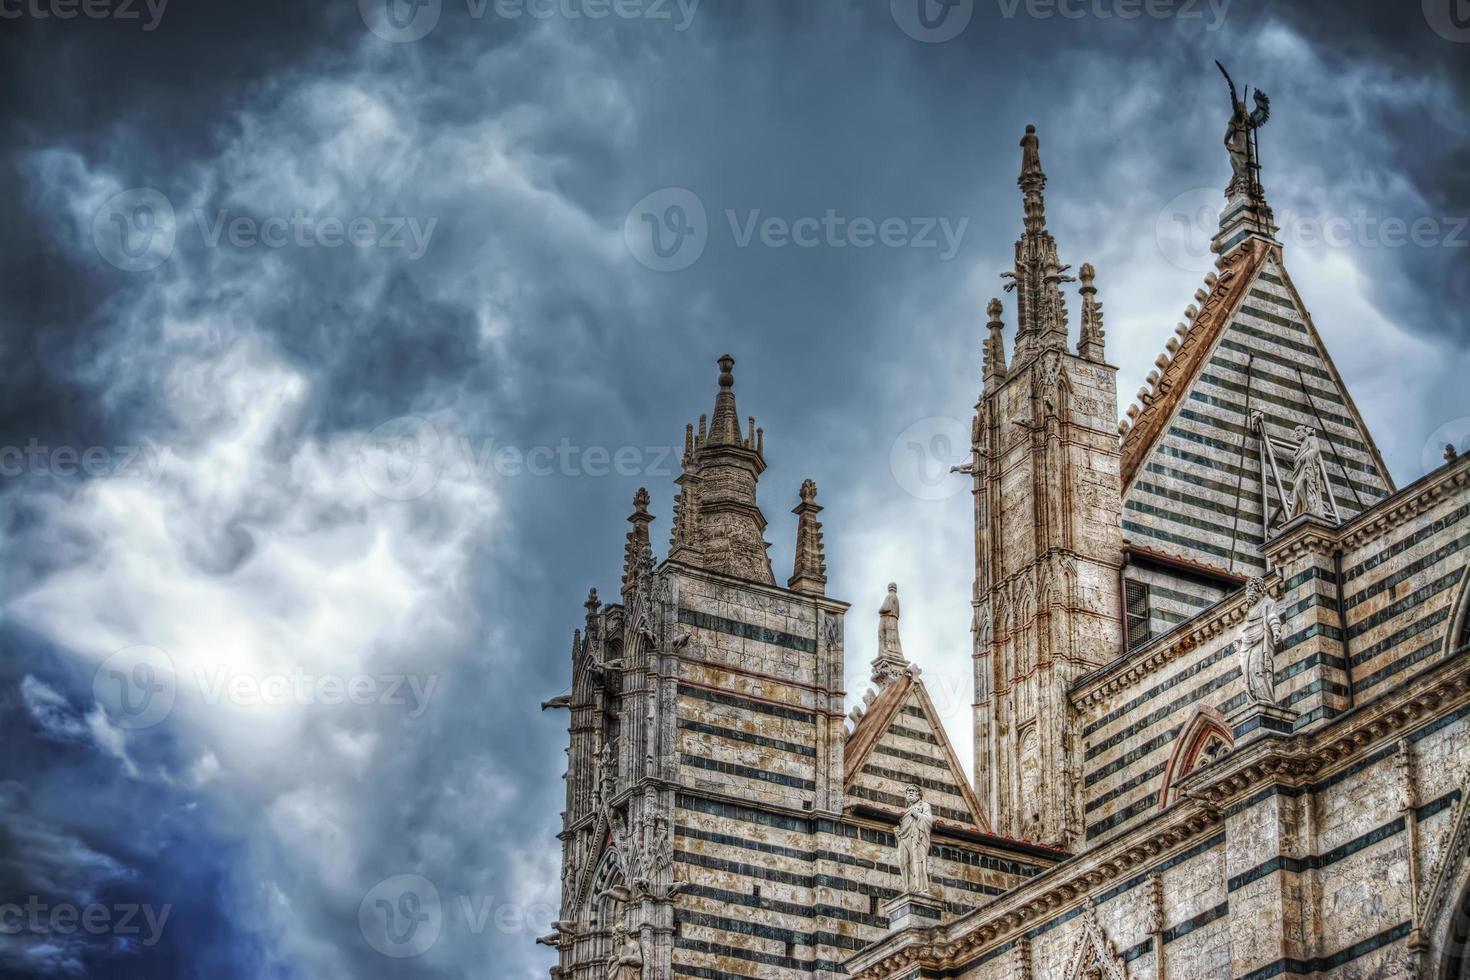 Siena Duomo under a dramatic sky seen from behind photo